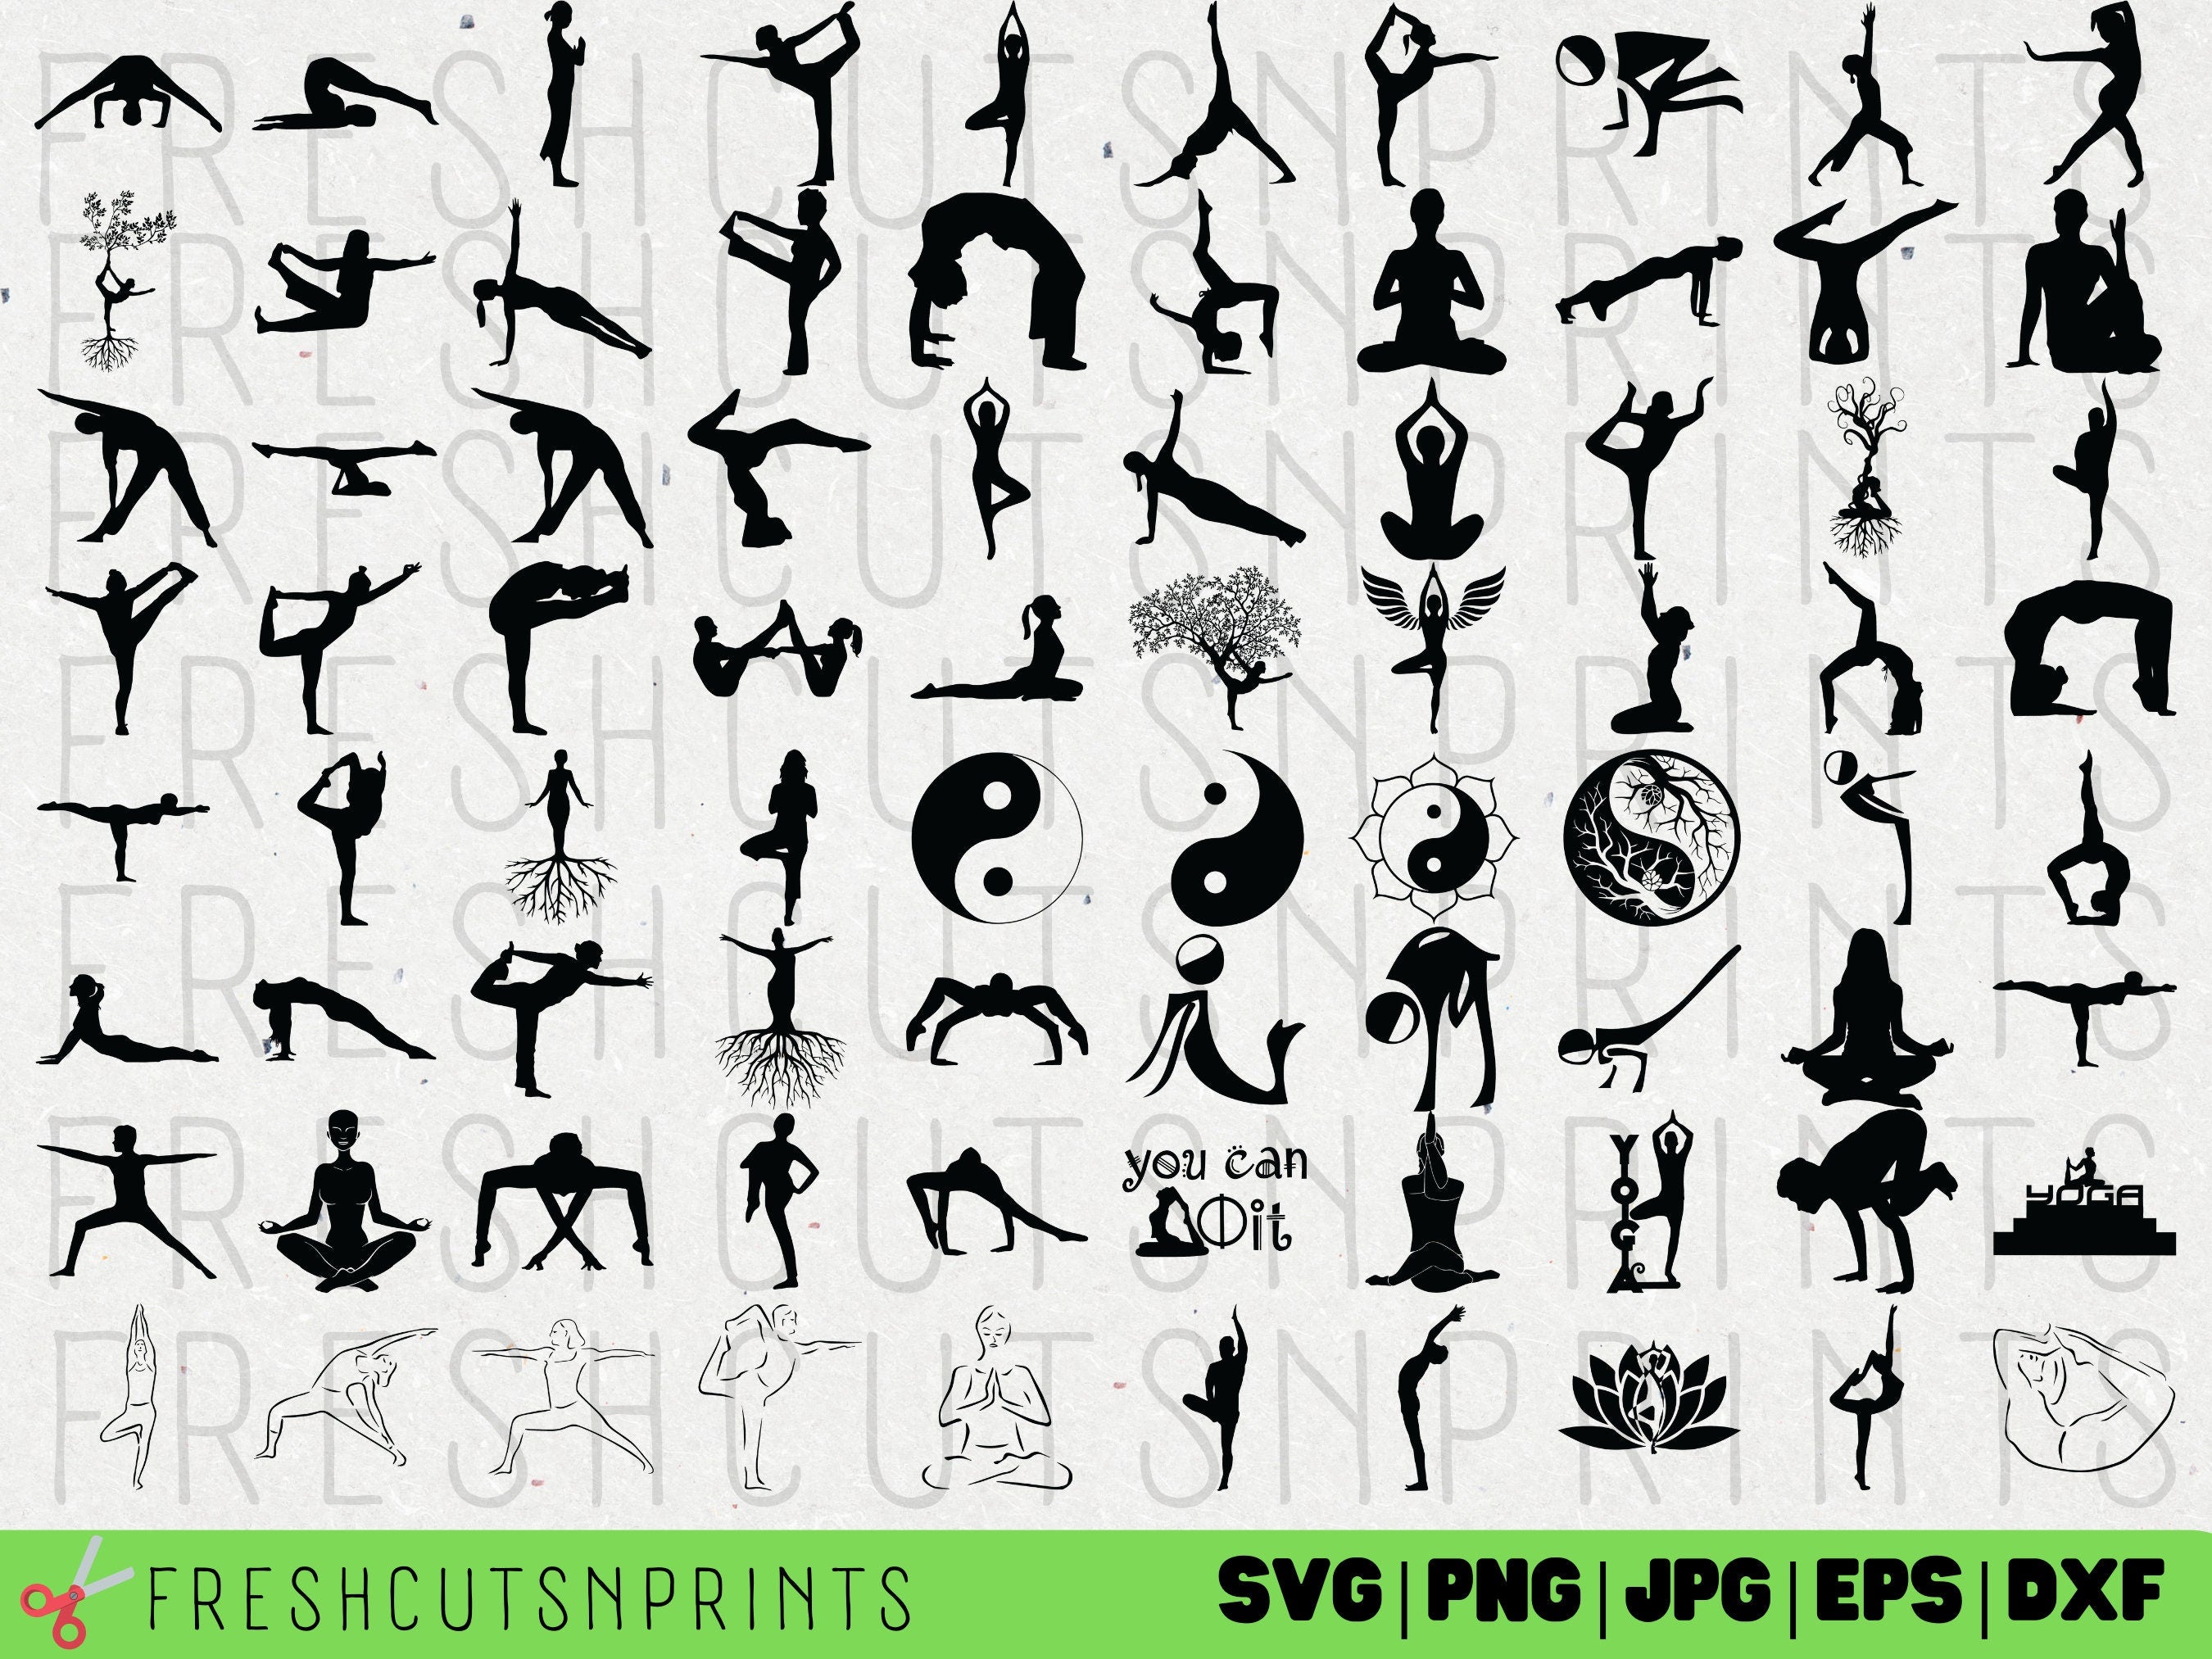 Divalis Top 100 Yoga Poses Scratch off Poster - Large Yoga India | Ubuy